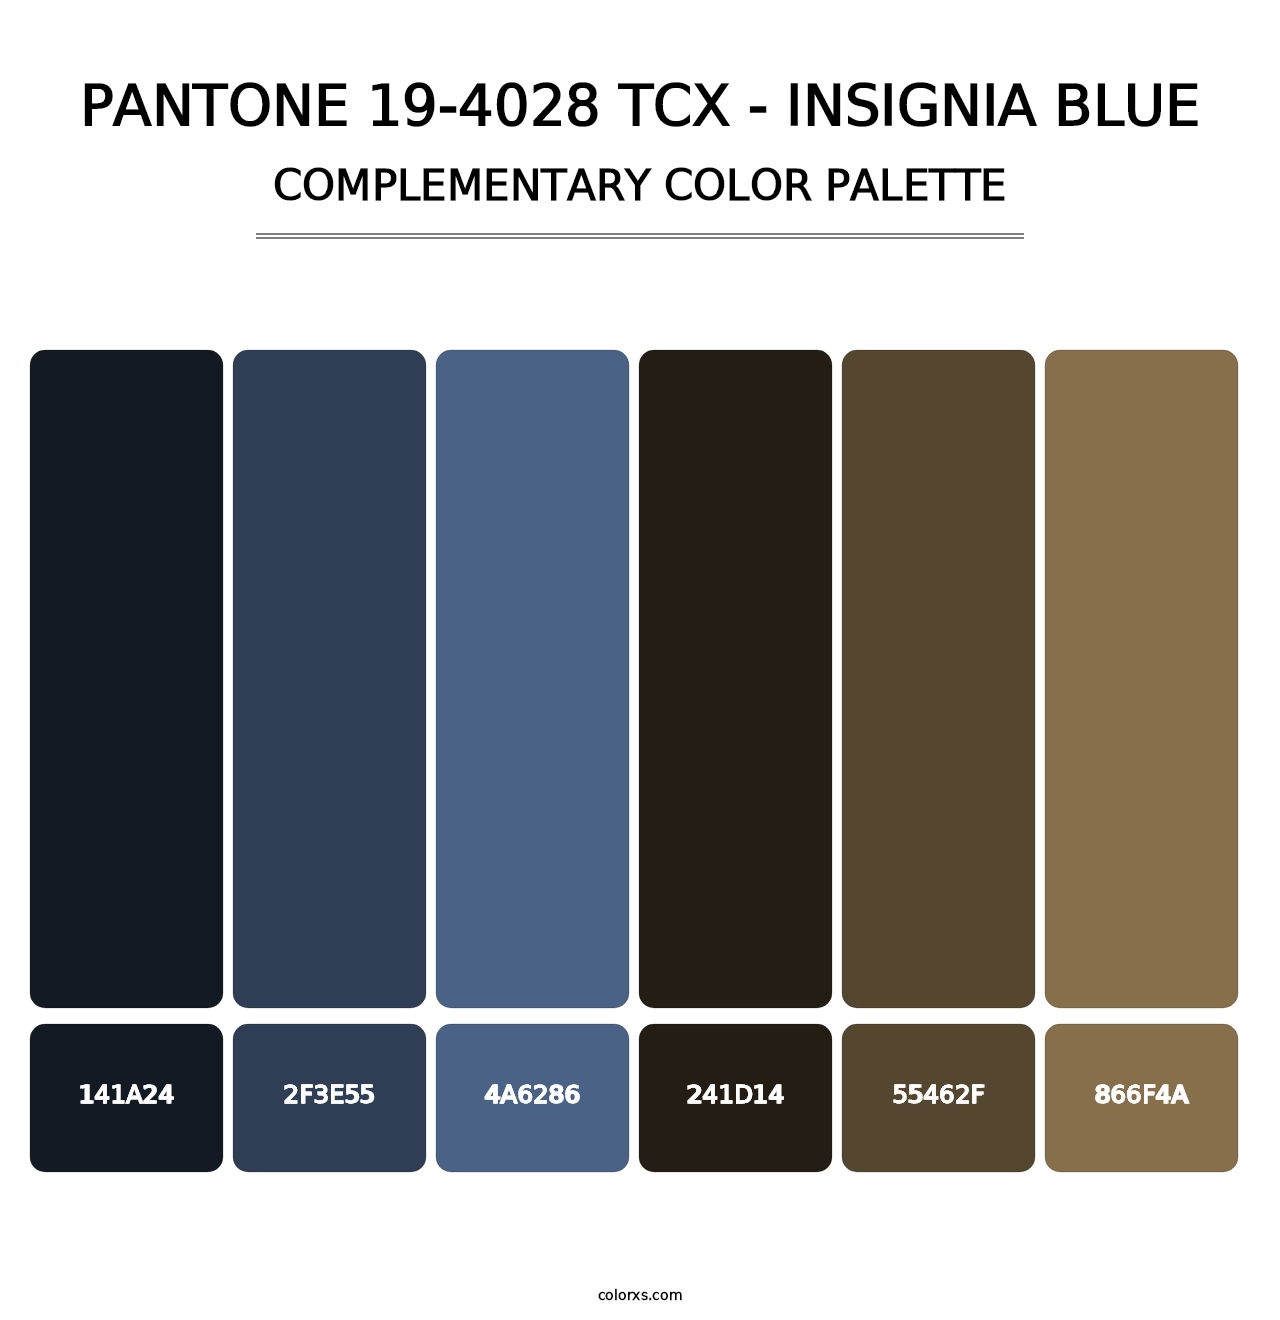 PANTONE 19-4028 TCX - Insignia Blue - Complementary Color Palette